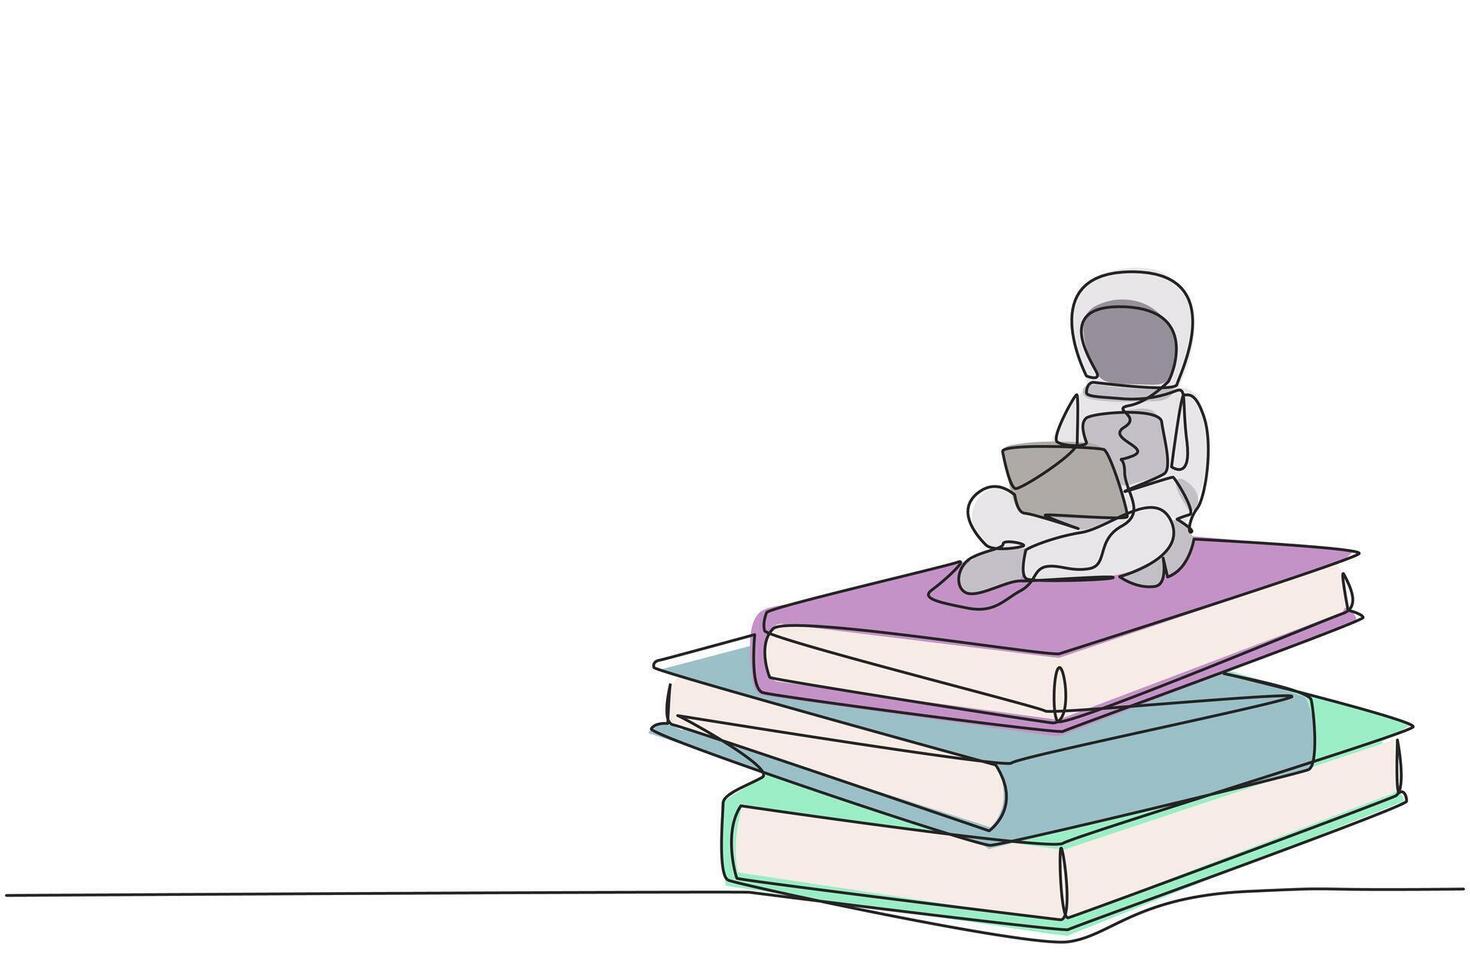 Single one line drawing young energetic astronaut sitting on stack of giant books typing laptop. Expedition problem in the database. Galaxy cosmic outer space. Continuous line graphic illustration vector